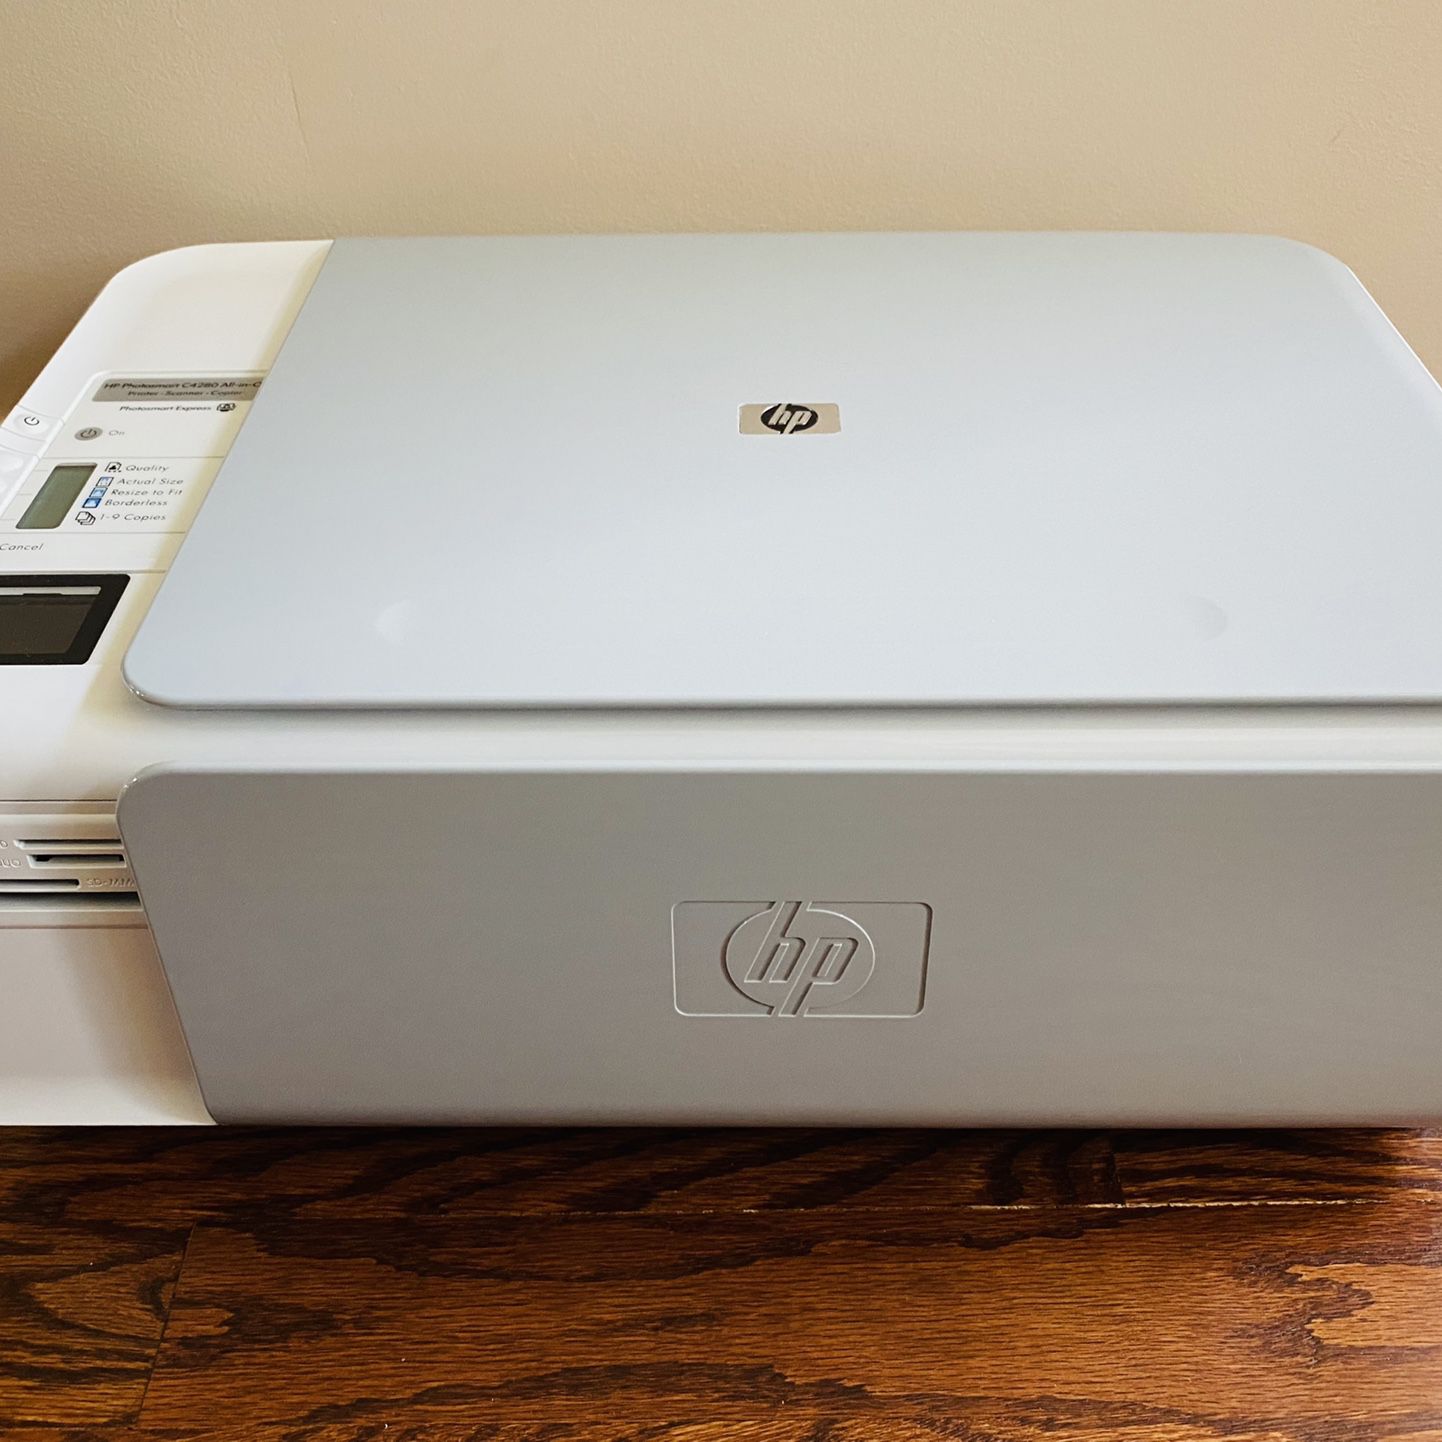 HP PhotoSmart C4280 All-In-One InkJet Printer for in Chicago, OfferUp